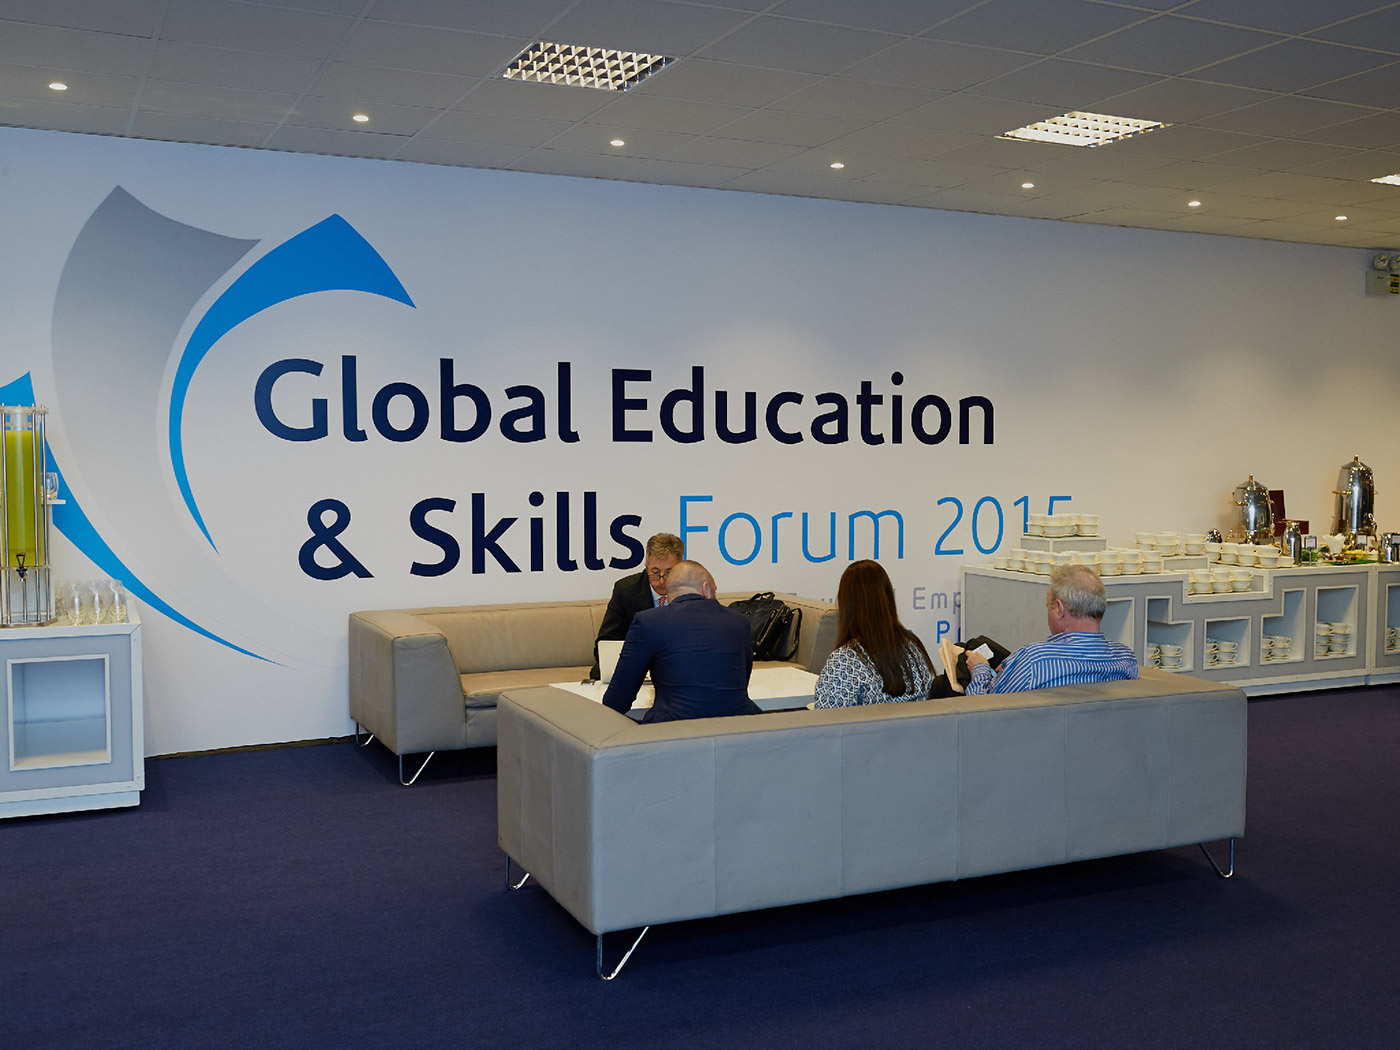 GESF Global Education skills forum conference Stage set decoration